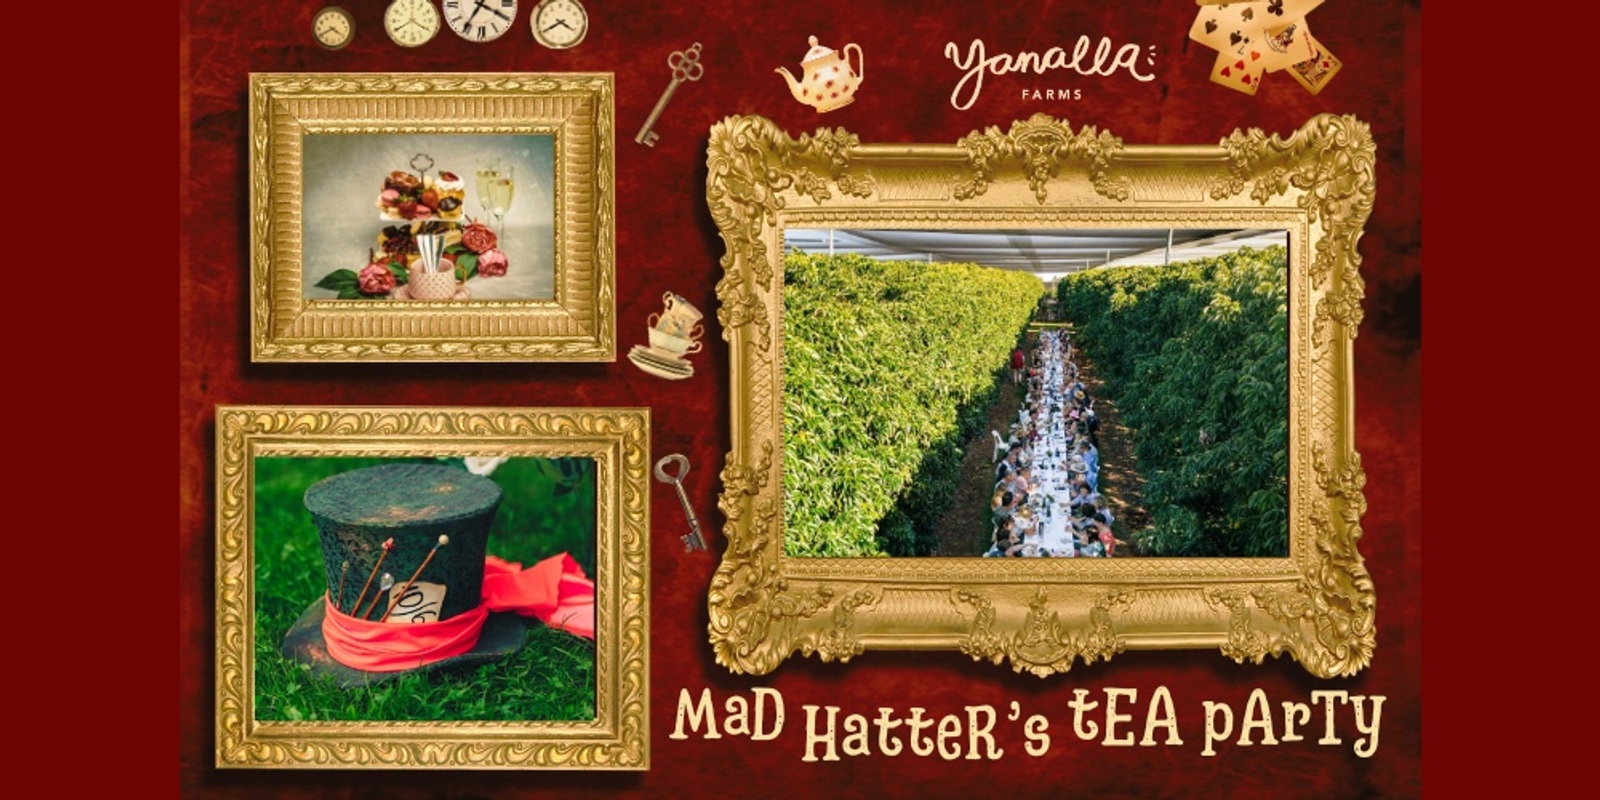 Banner image for YANALLA FARMS - Mad Hatter's Tea Party